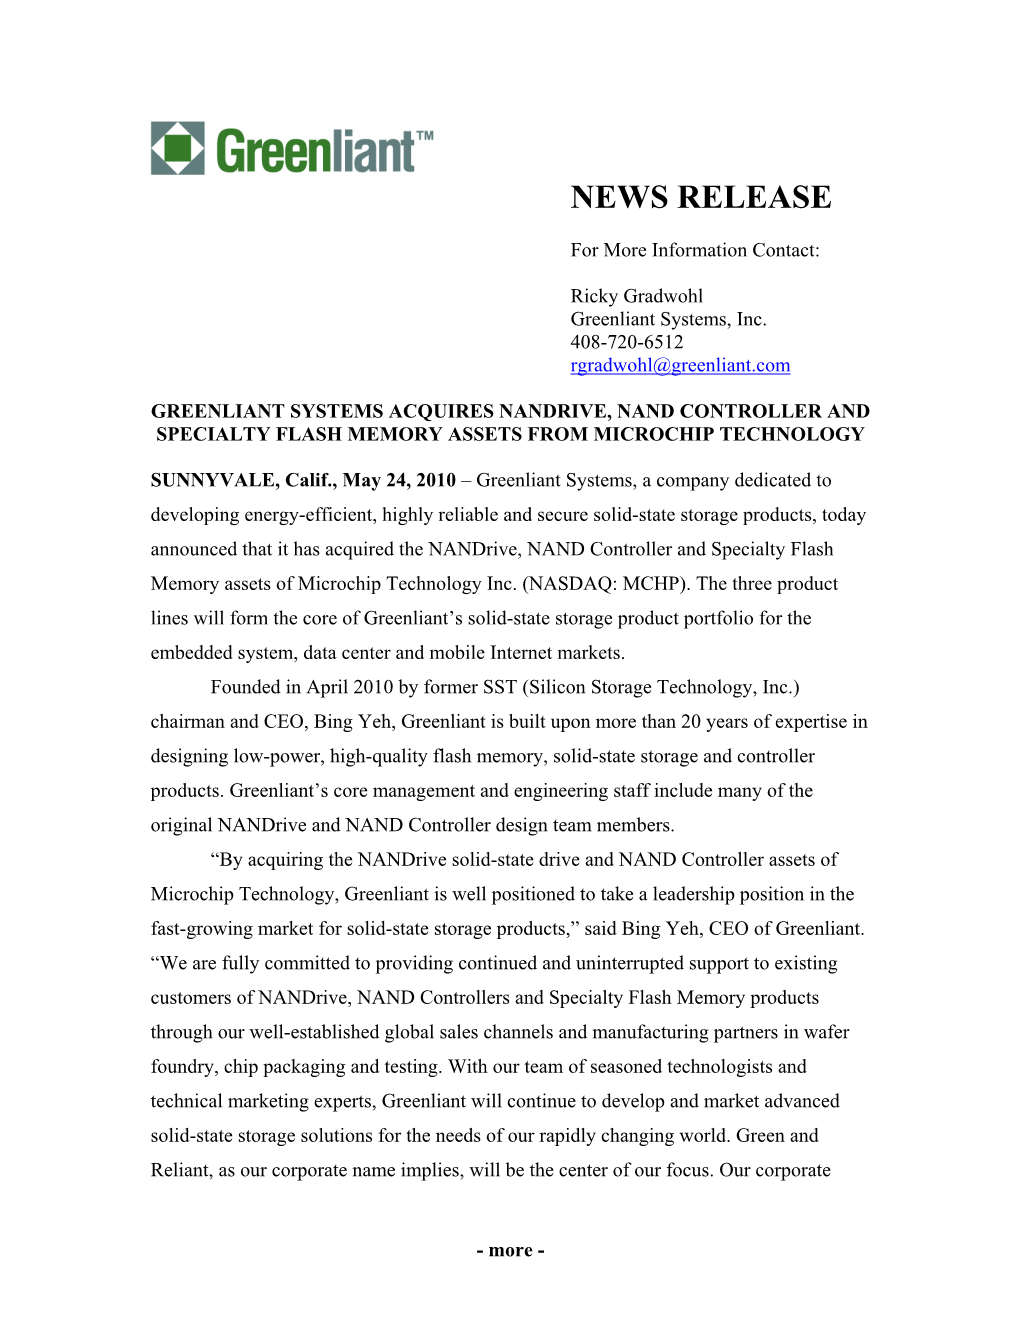 Greenliant Systems Acquires Nandrive, Nand Controller and Specialty Flash Memory Assets from Microchip Technology